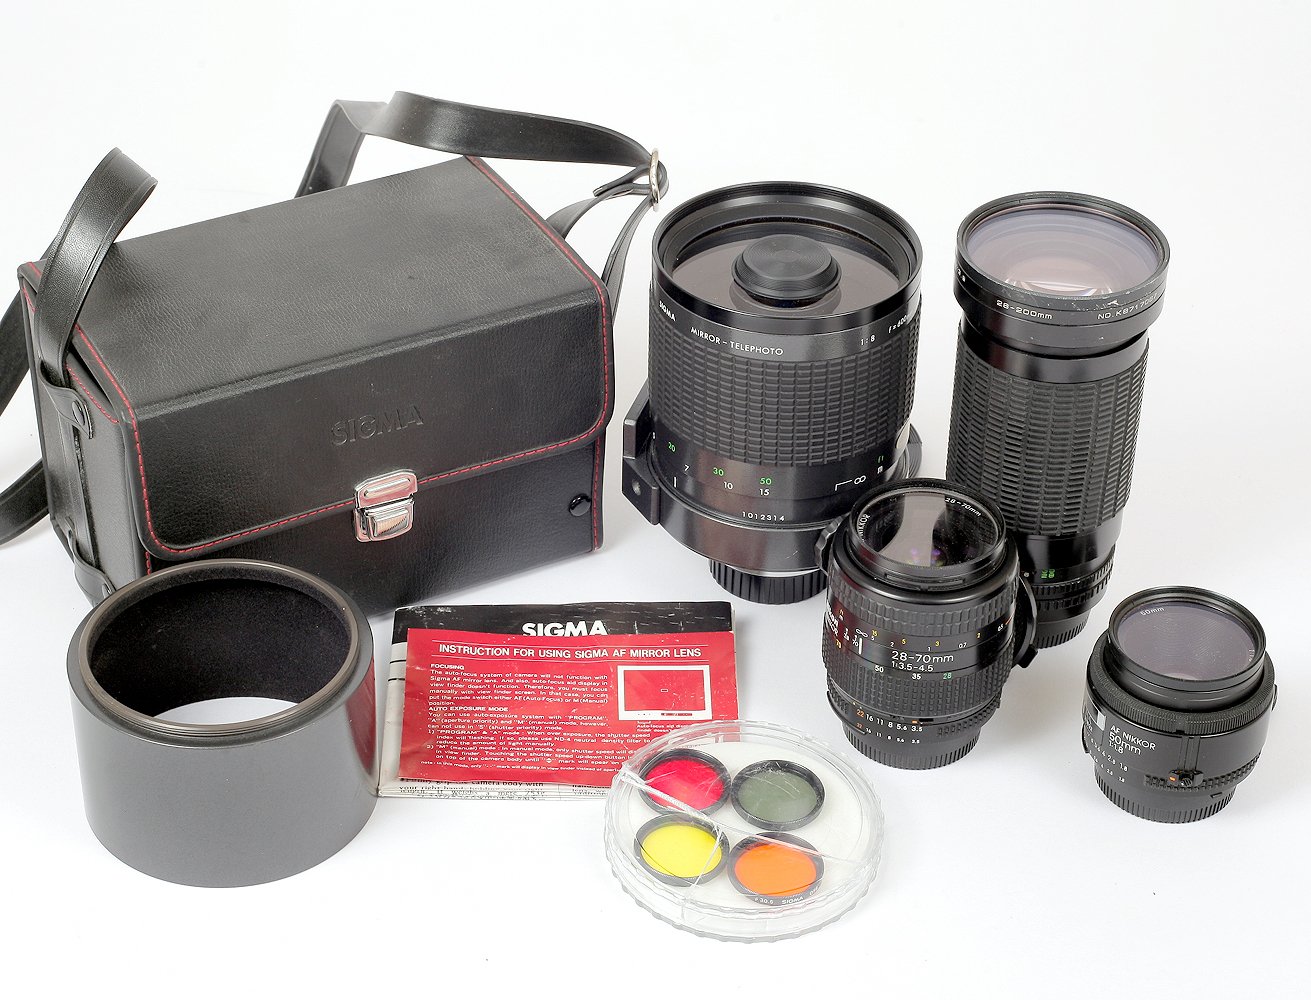 Sigma 600mm (NOT 500mm) Mirror Lens & Other Nikon Fit Manual Focus Lenses.